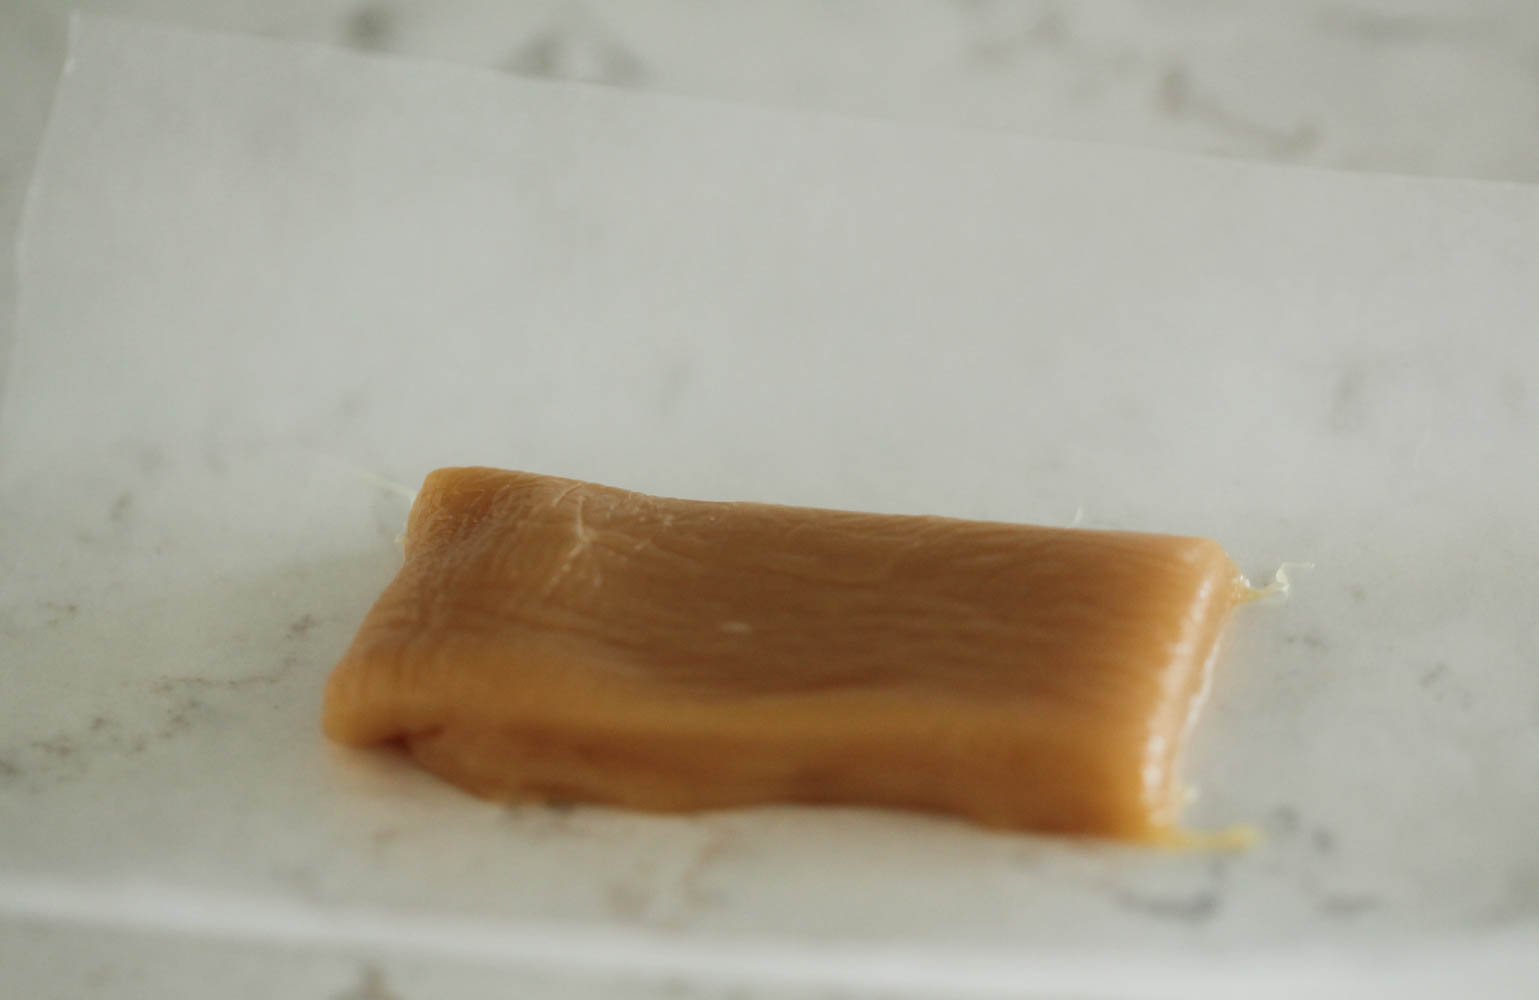 Caramel piece waiting to be wrapped in wax paper